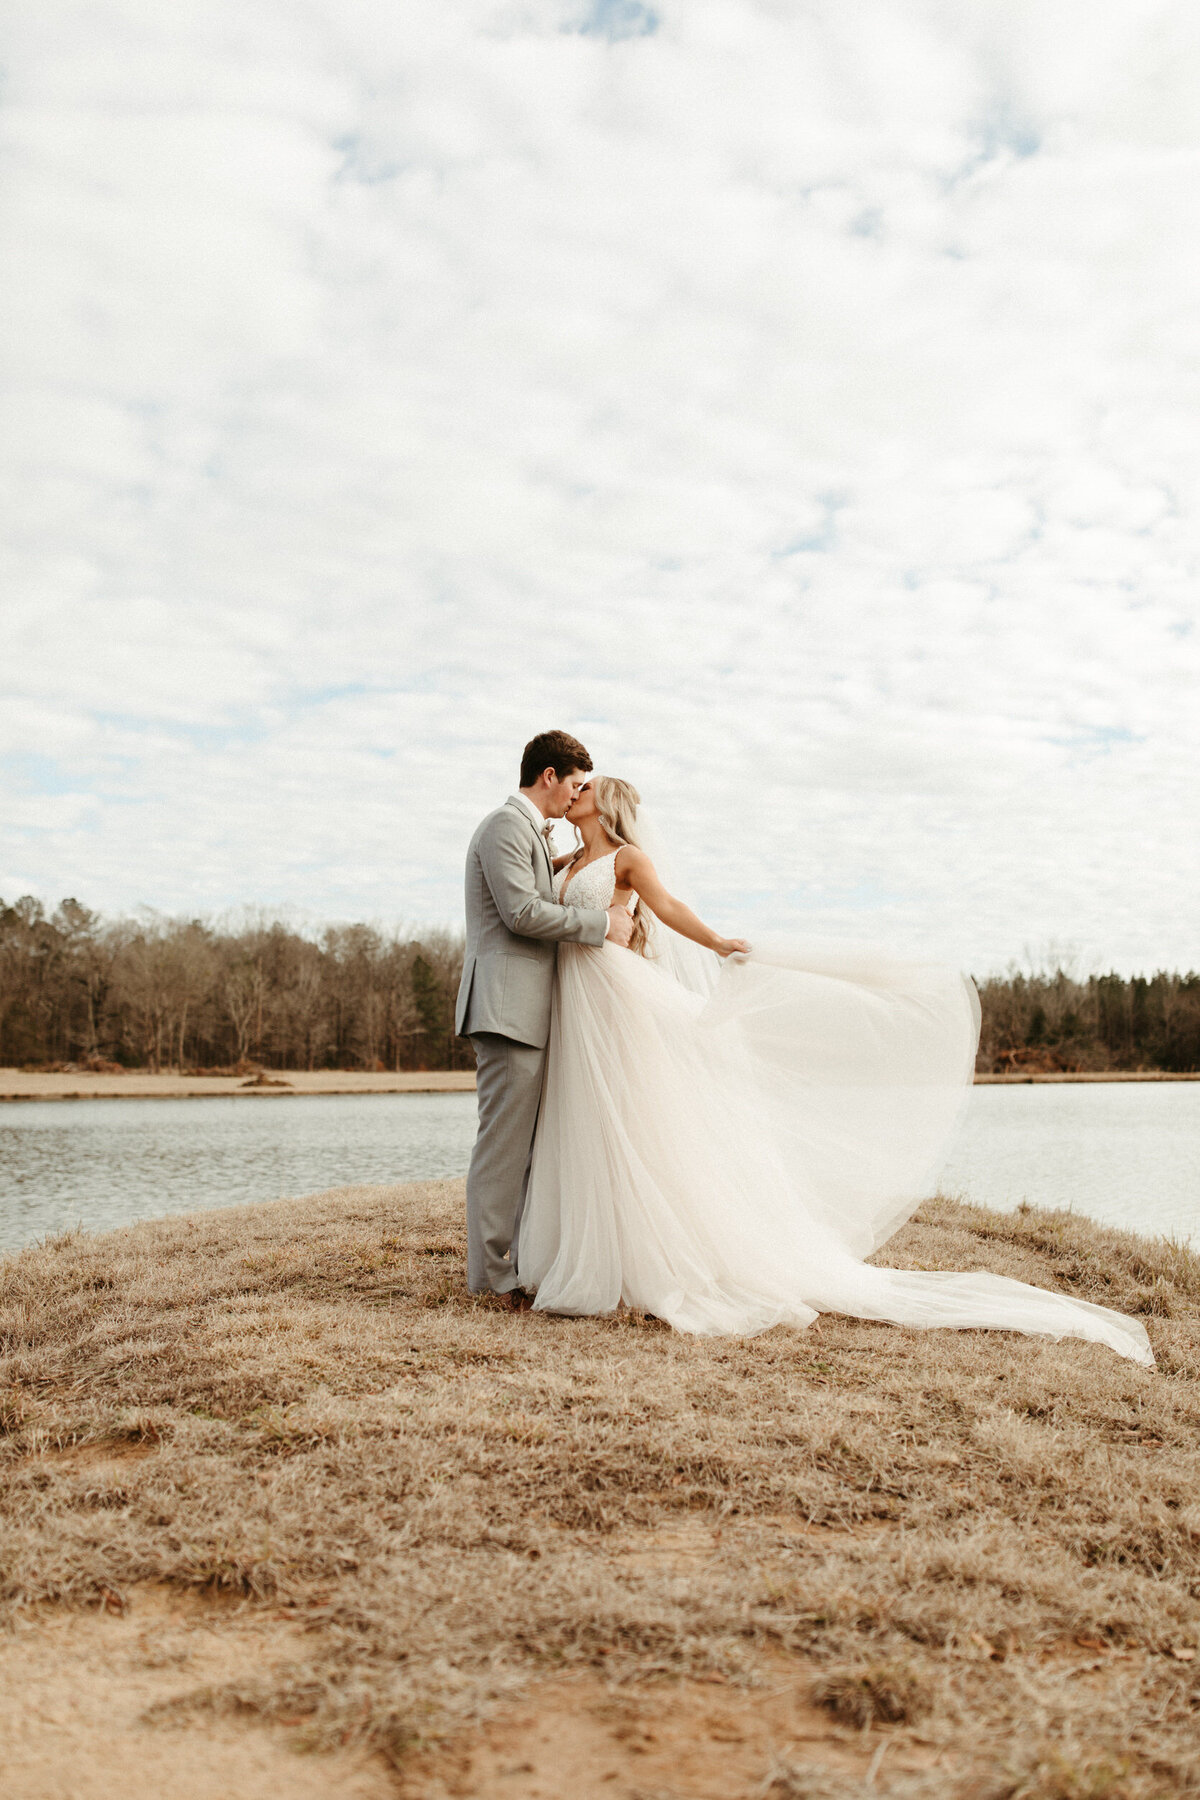 Bride waving tulle wedding dress as her groom is holding and kissing her with a lake behind them